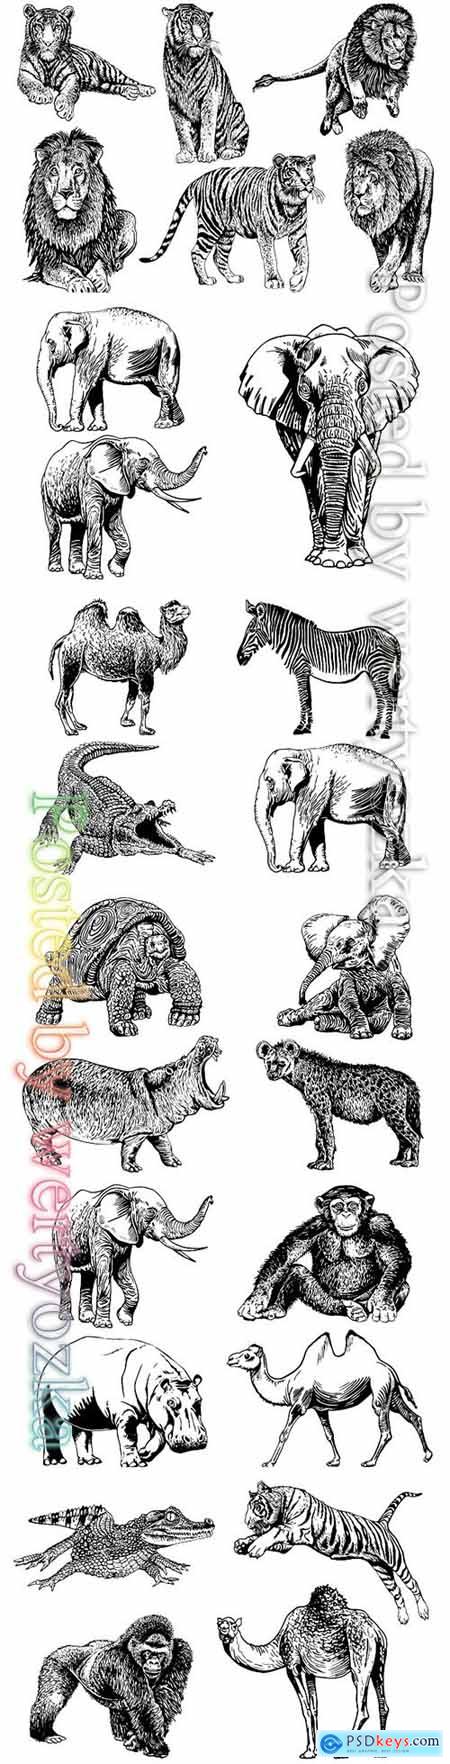 Animals isolated on white vector background